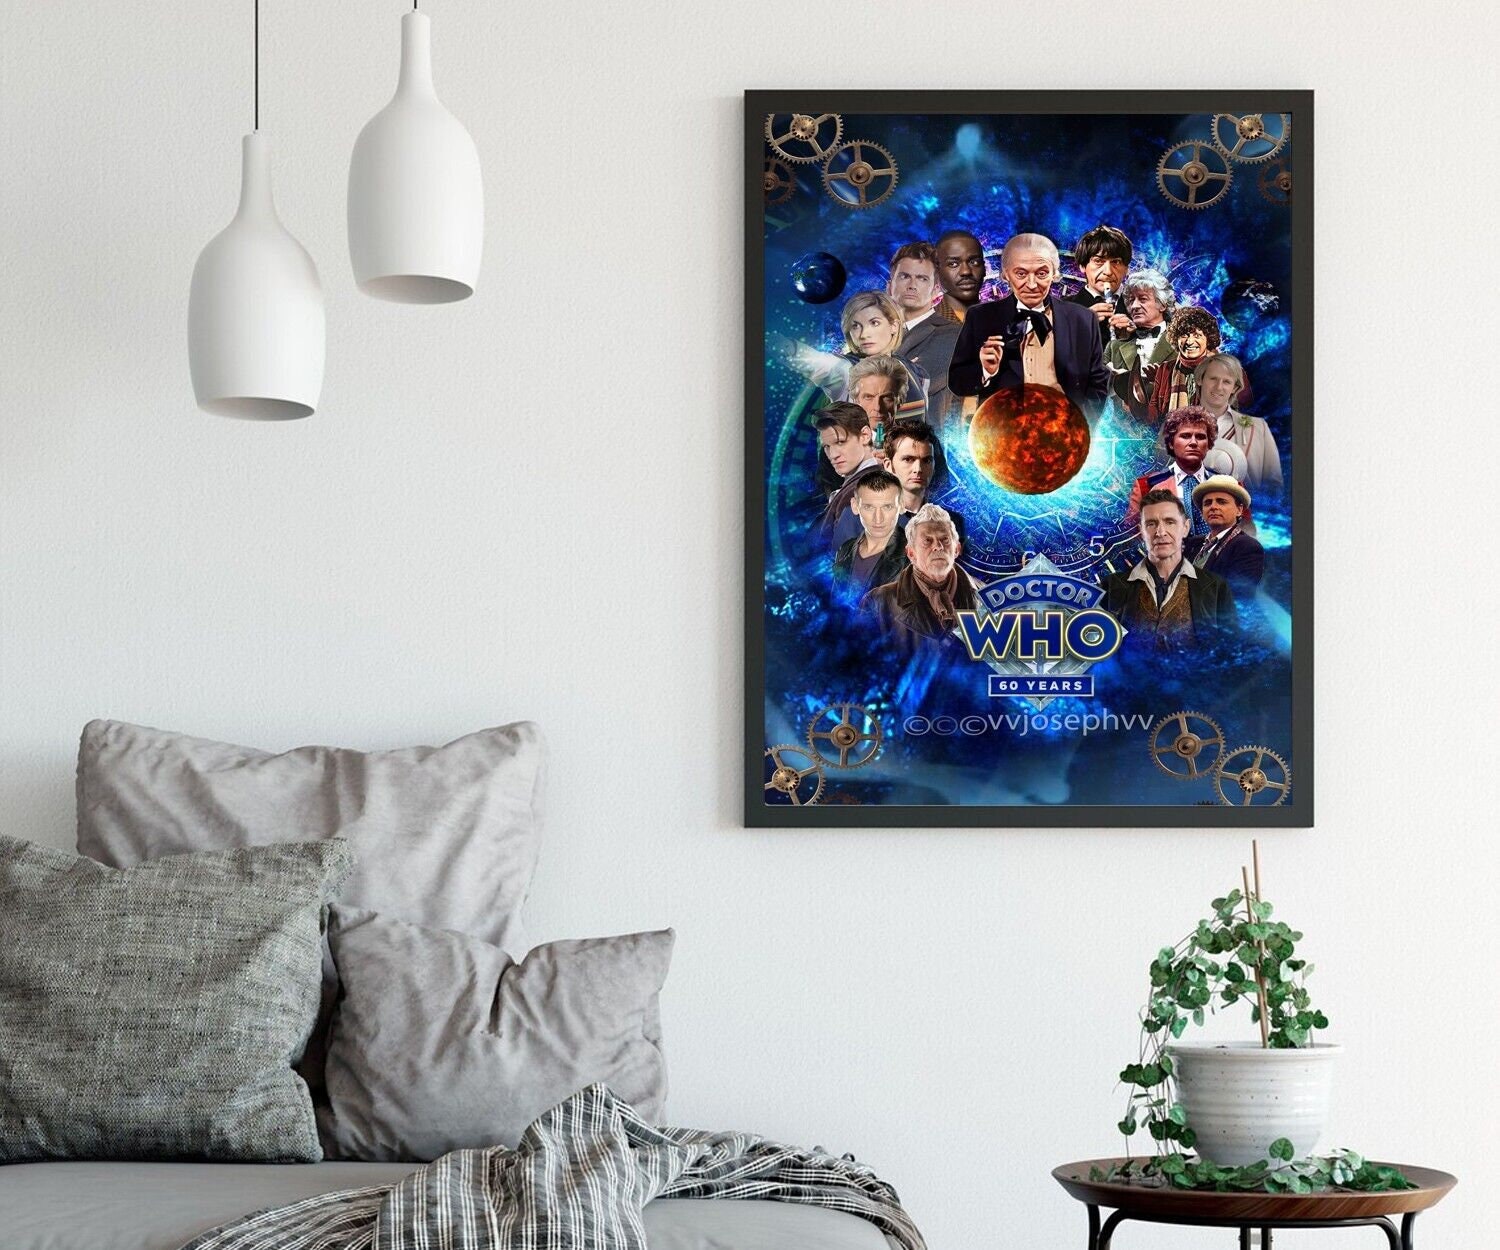 Discover Doctor Who 2023 Poster, 60th Anniversary Poster, Home Decor, Wall Decor